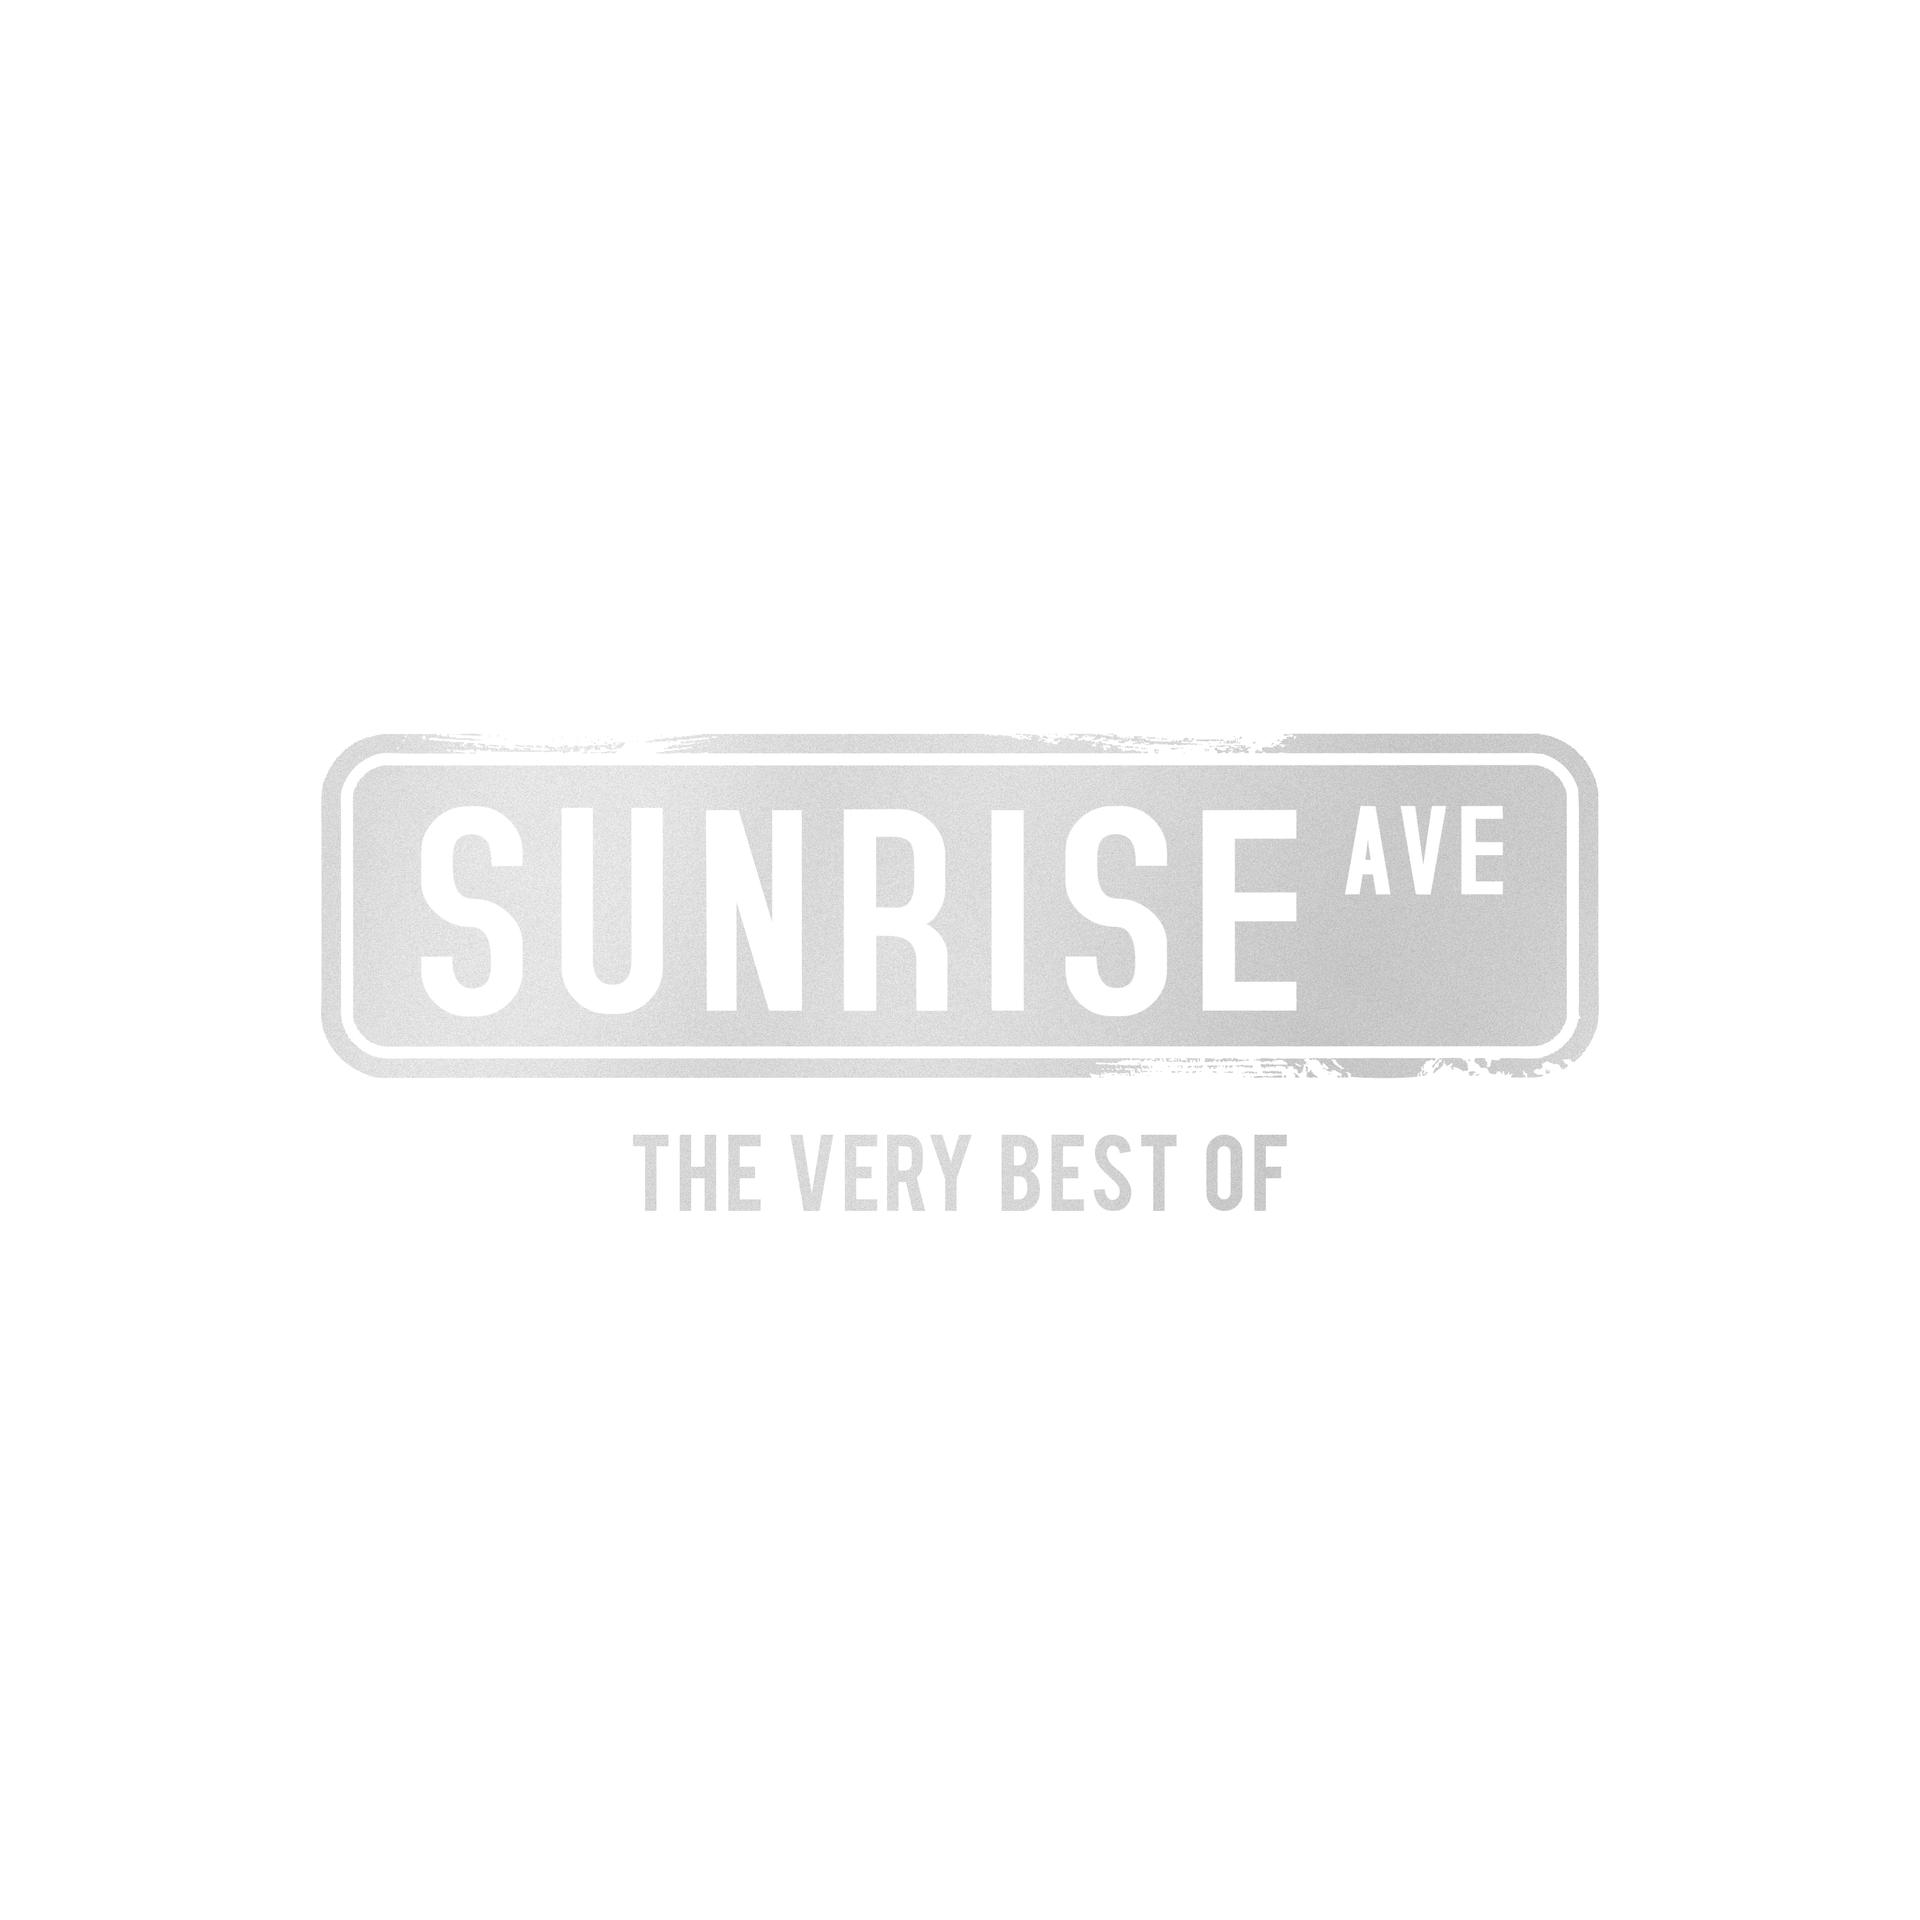 Of (CD) - Avenue Sunrise - Very Best The